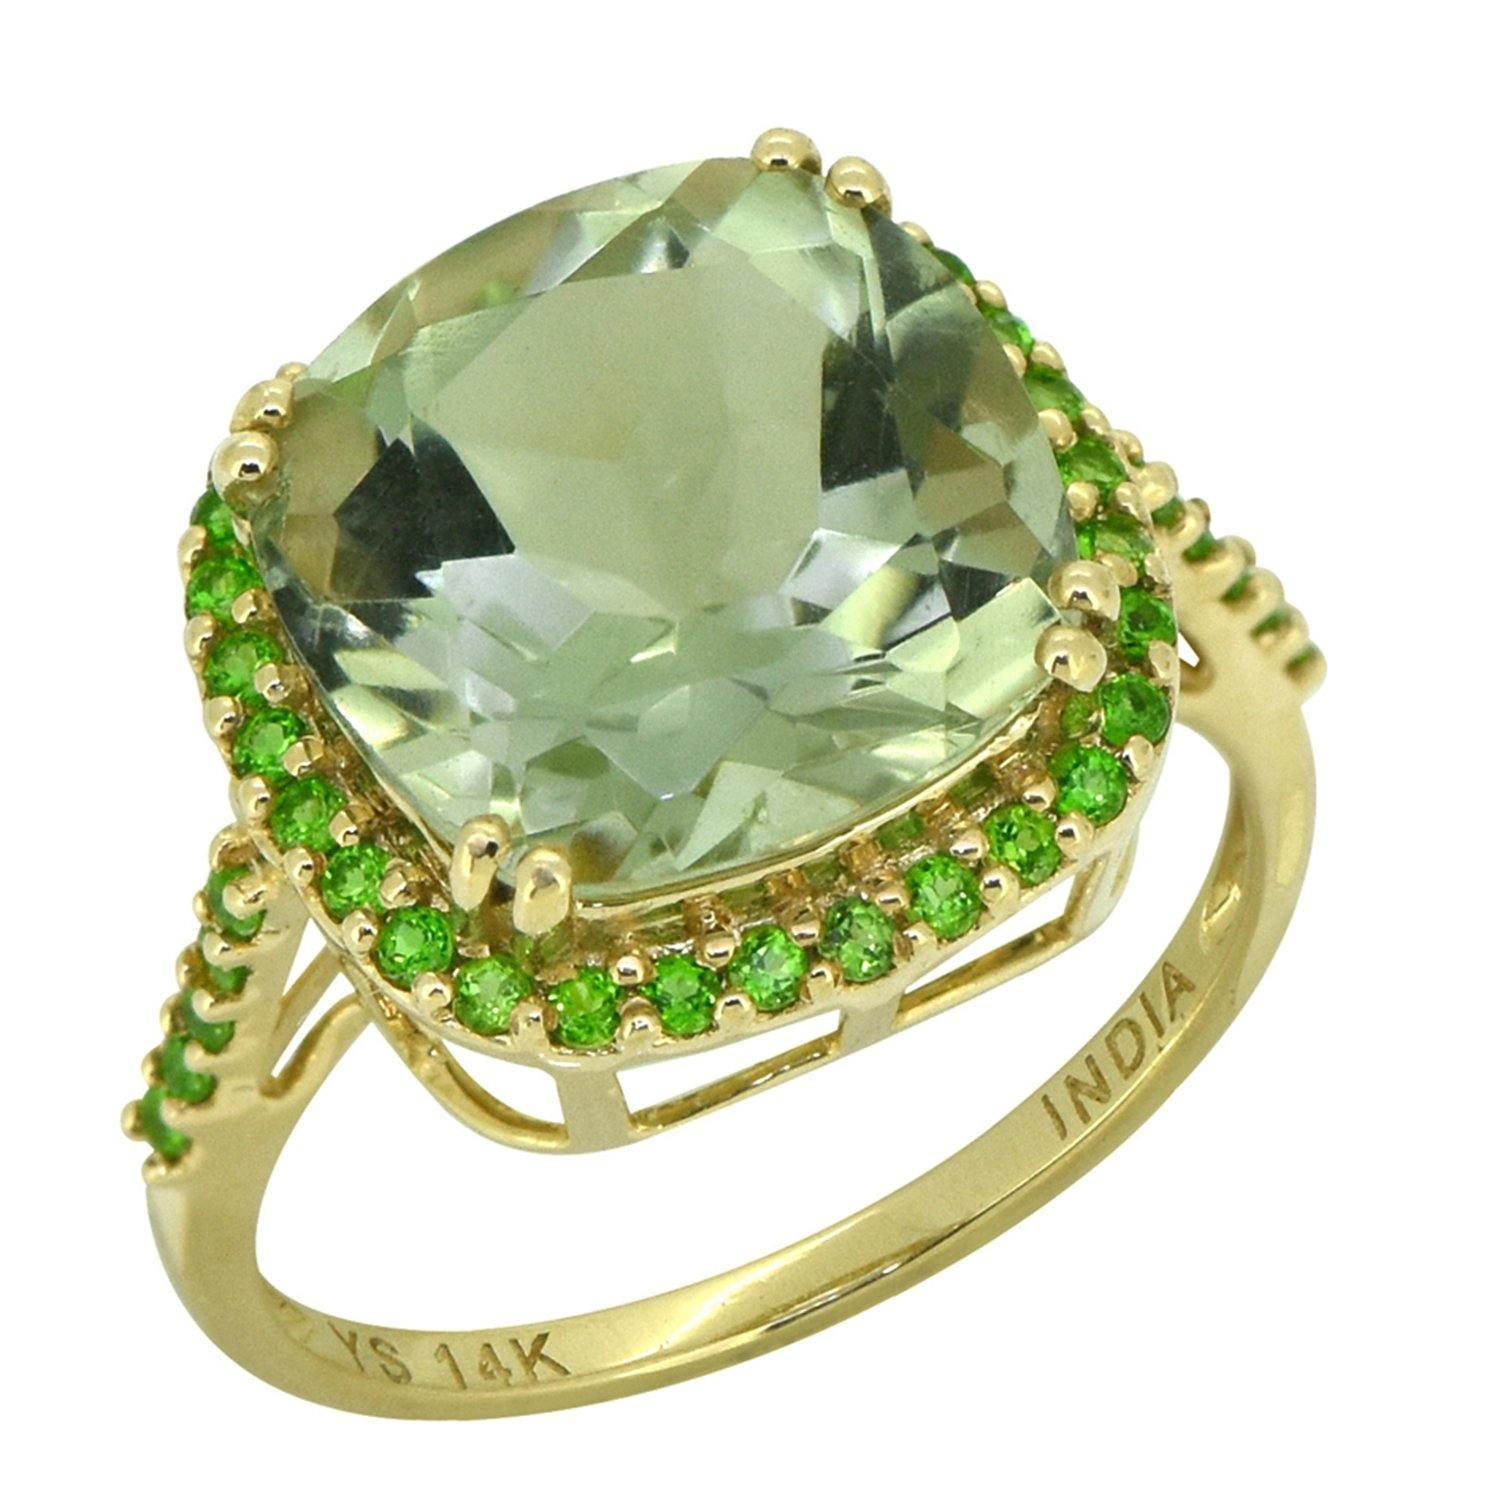 6.98 Ct. Green Amethyst Chrome Diopside Solid 14k Yellow Gold Ring Jewelry - YoTreasure